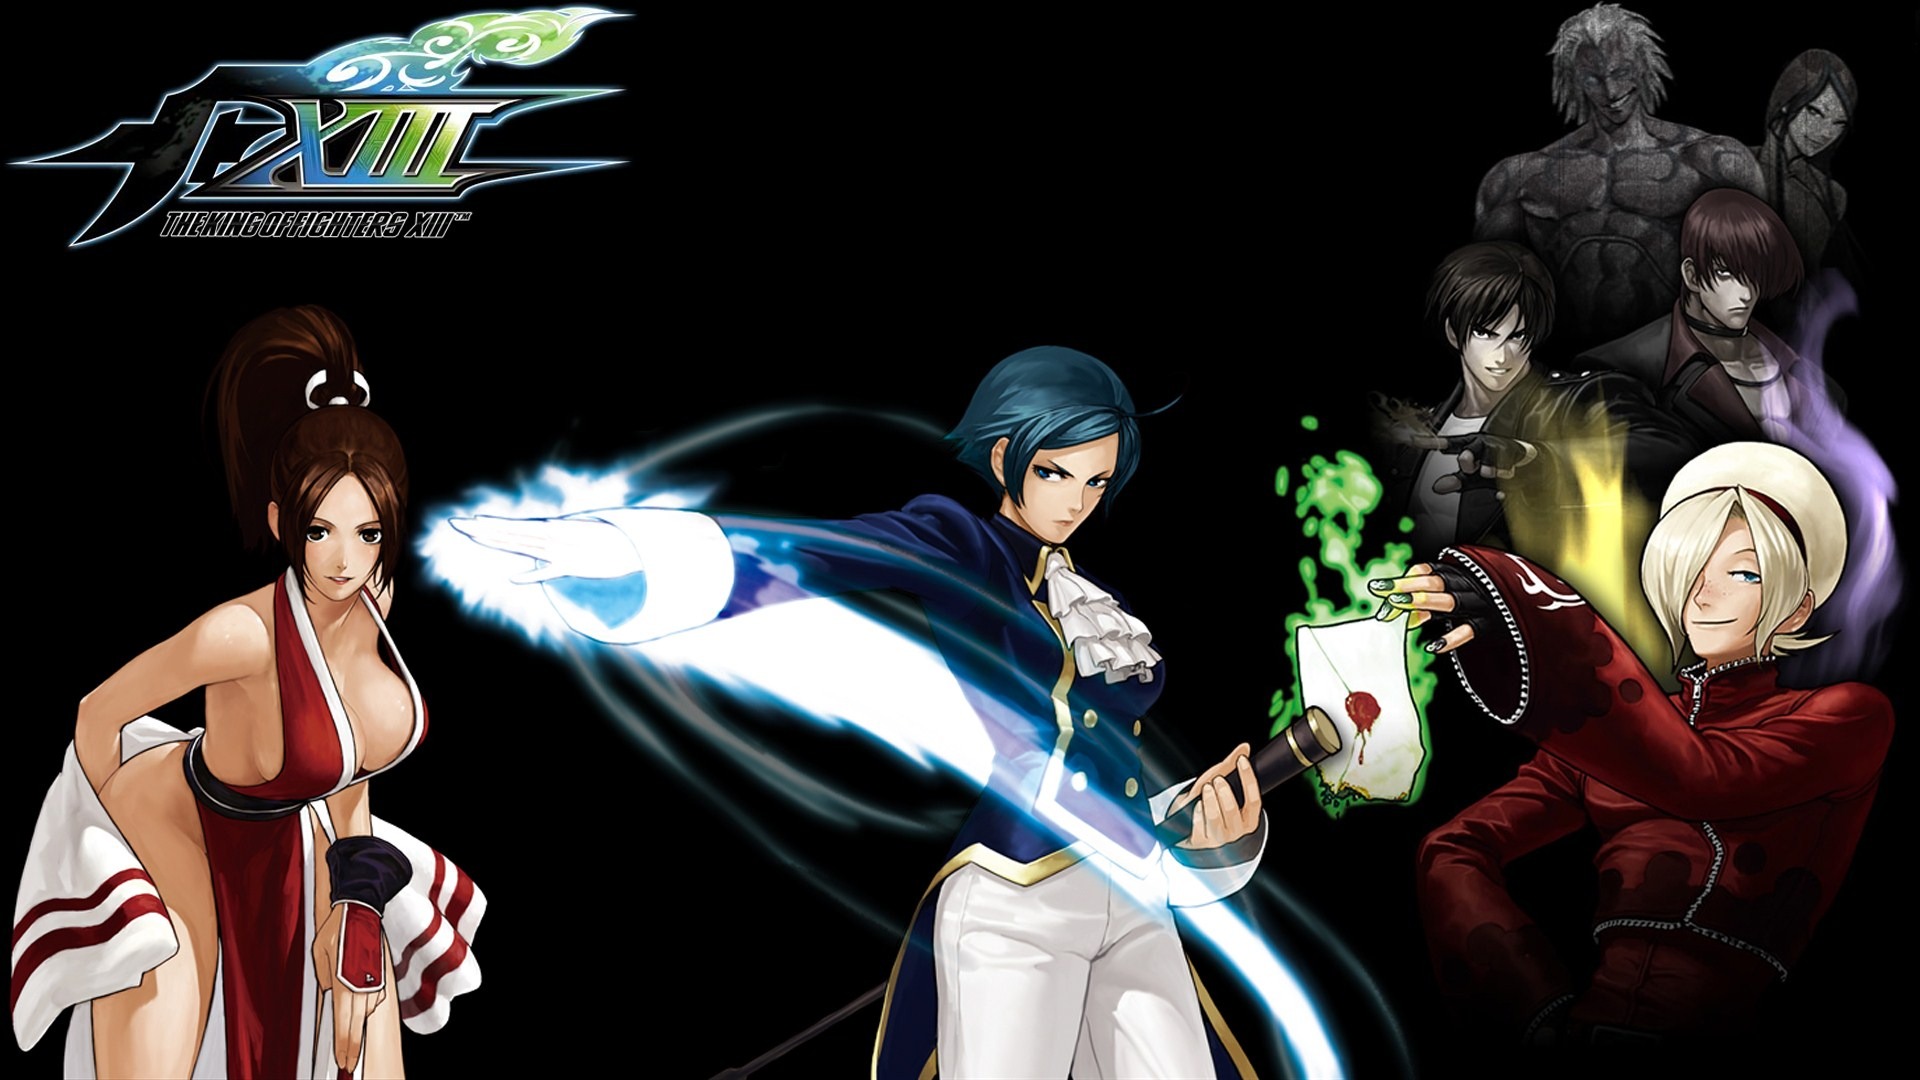 The King of Fighters XIII 拳皇13 壁纸专辑7 - 1920x1080